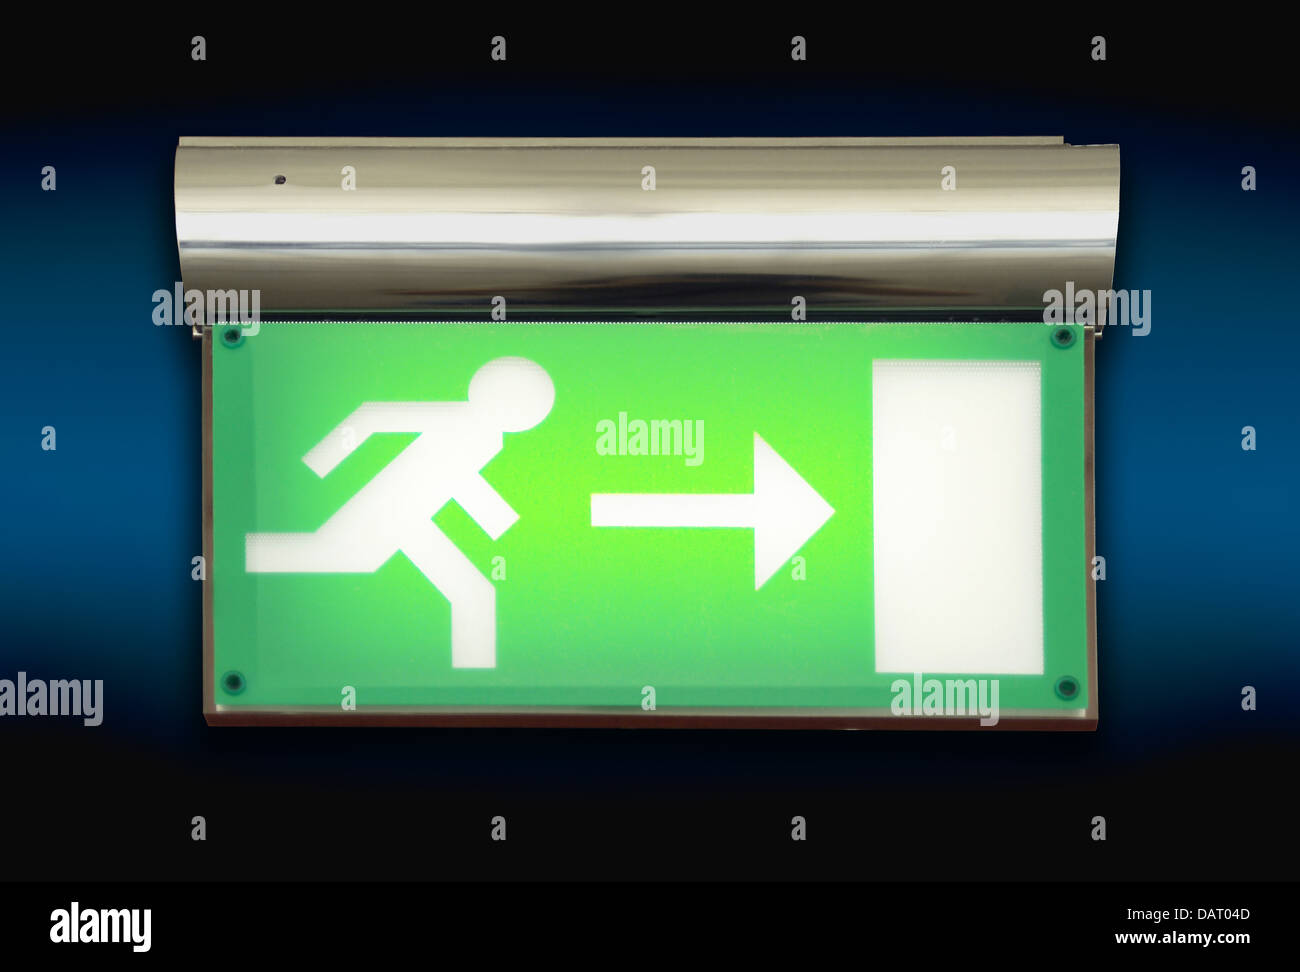 Emergency exit sign glowing green Stock Photo